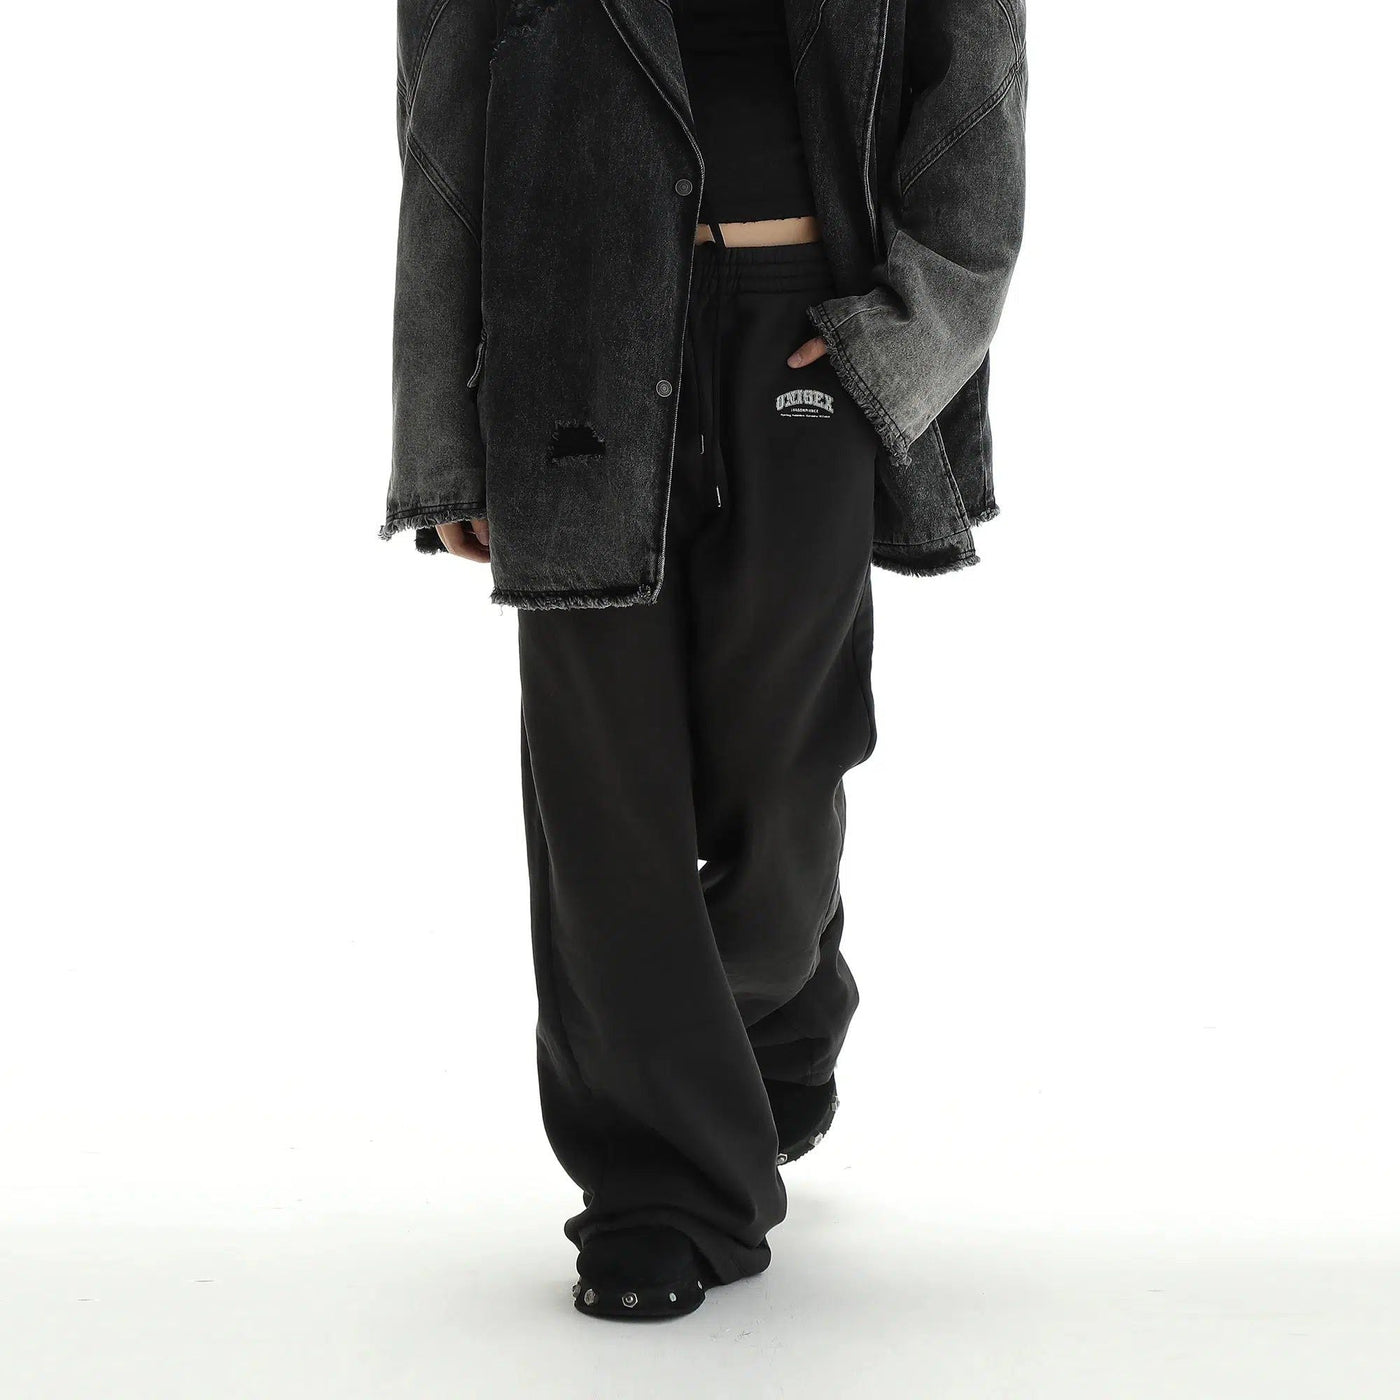 Faded and Gartered Sweatpants Korean Street Fashion Pants By Mason Prince Shop Online at OH Vault